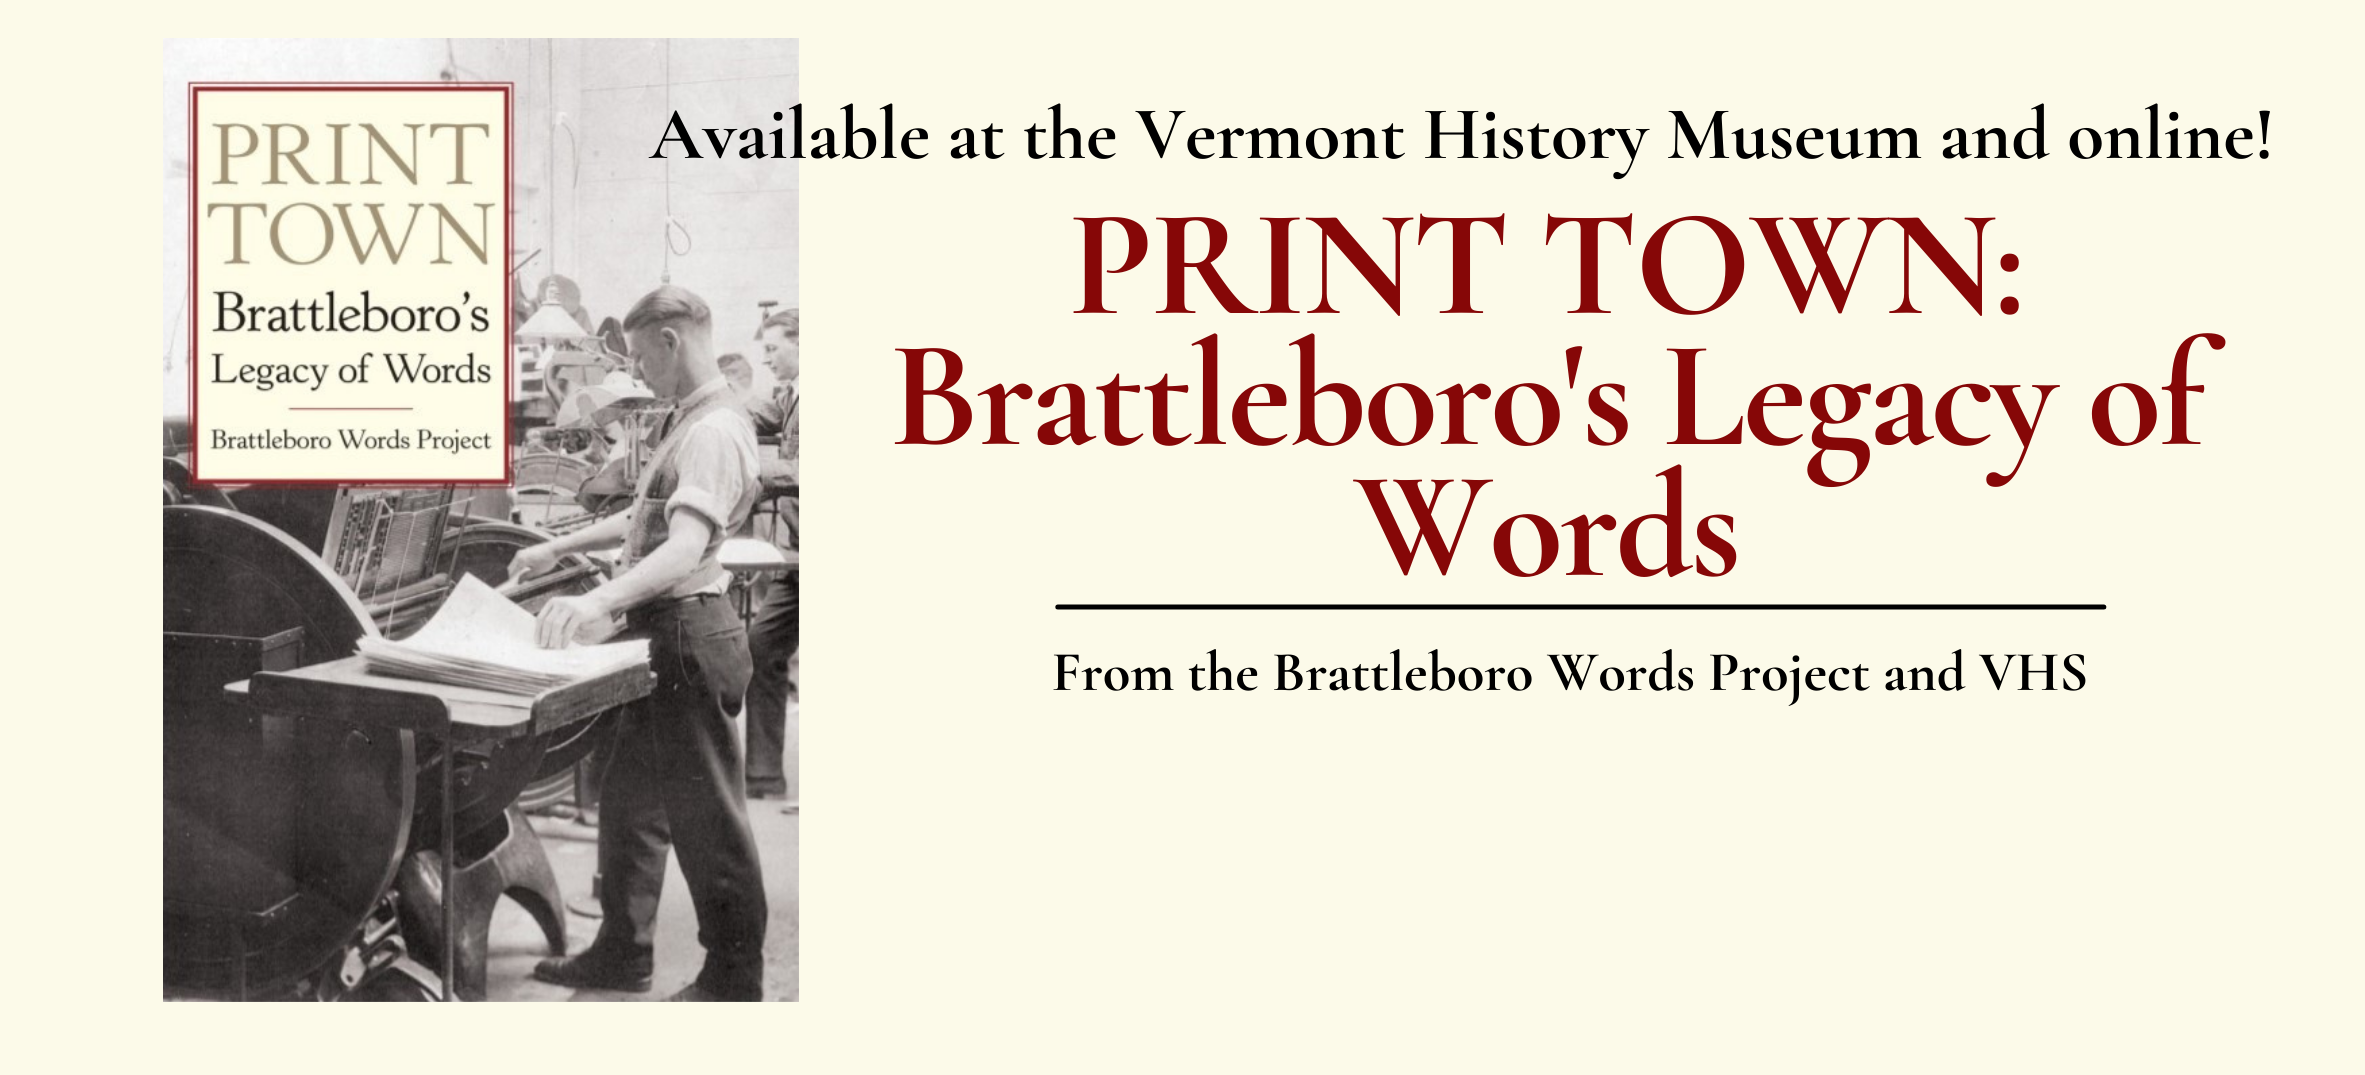 Print Town: Brattleboro's Legacy of Words. Available at the Vermont History Museum and online!